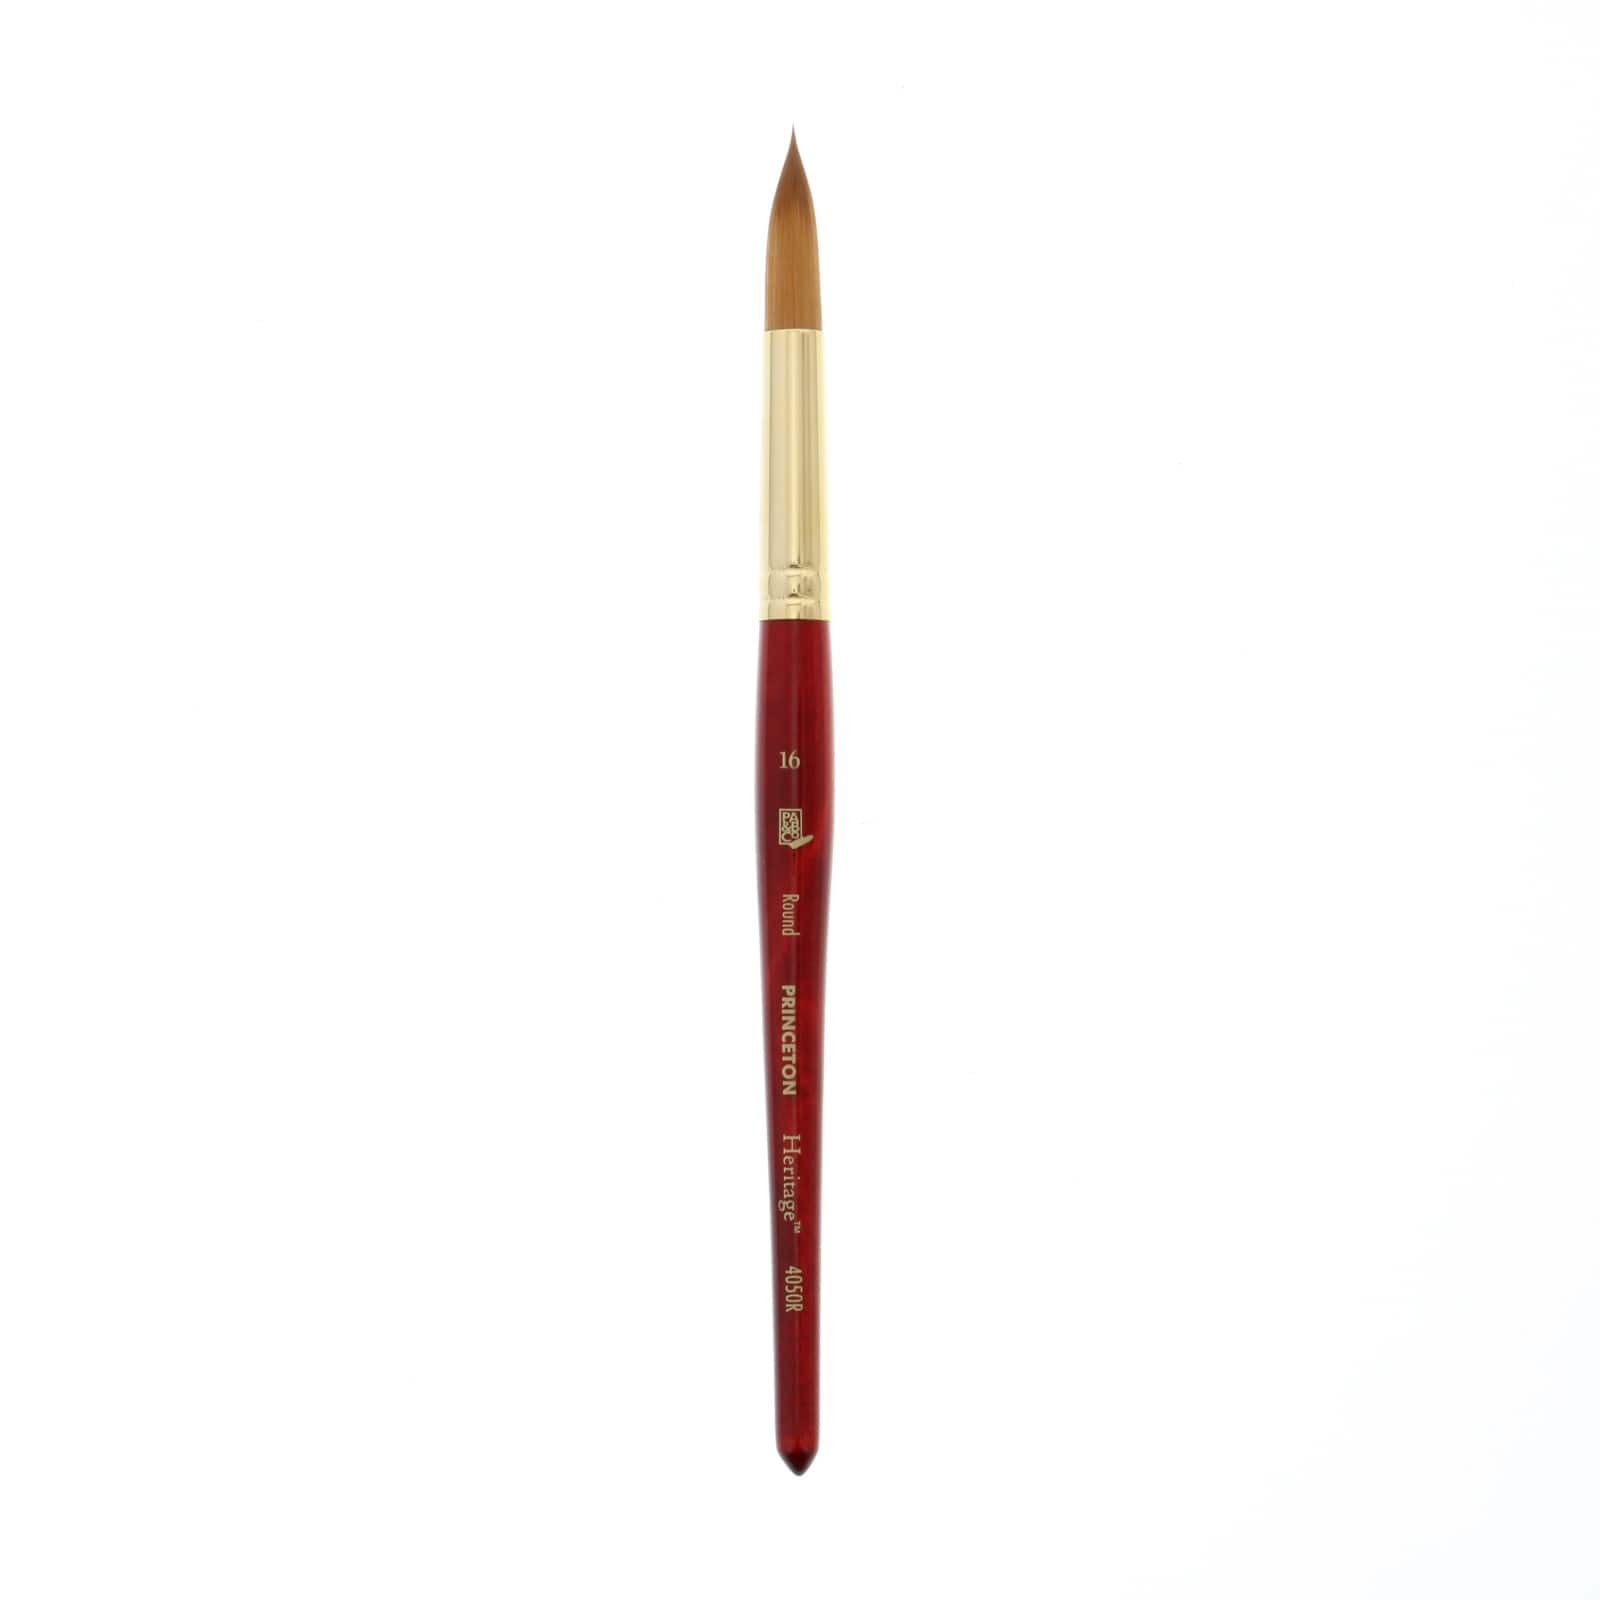  Princeton Heritage, Golden Taklon Brush for Watercolor &  Acrylic, Series 4050 Round Synthetic Sable, Size 6 : Artists Round  Paintbrushes : Arts, Crafts & Sewing